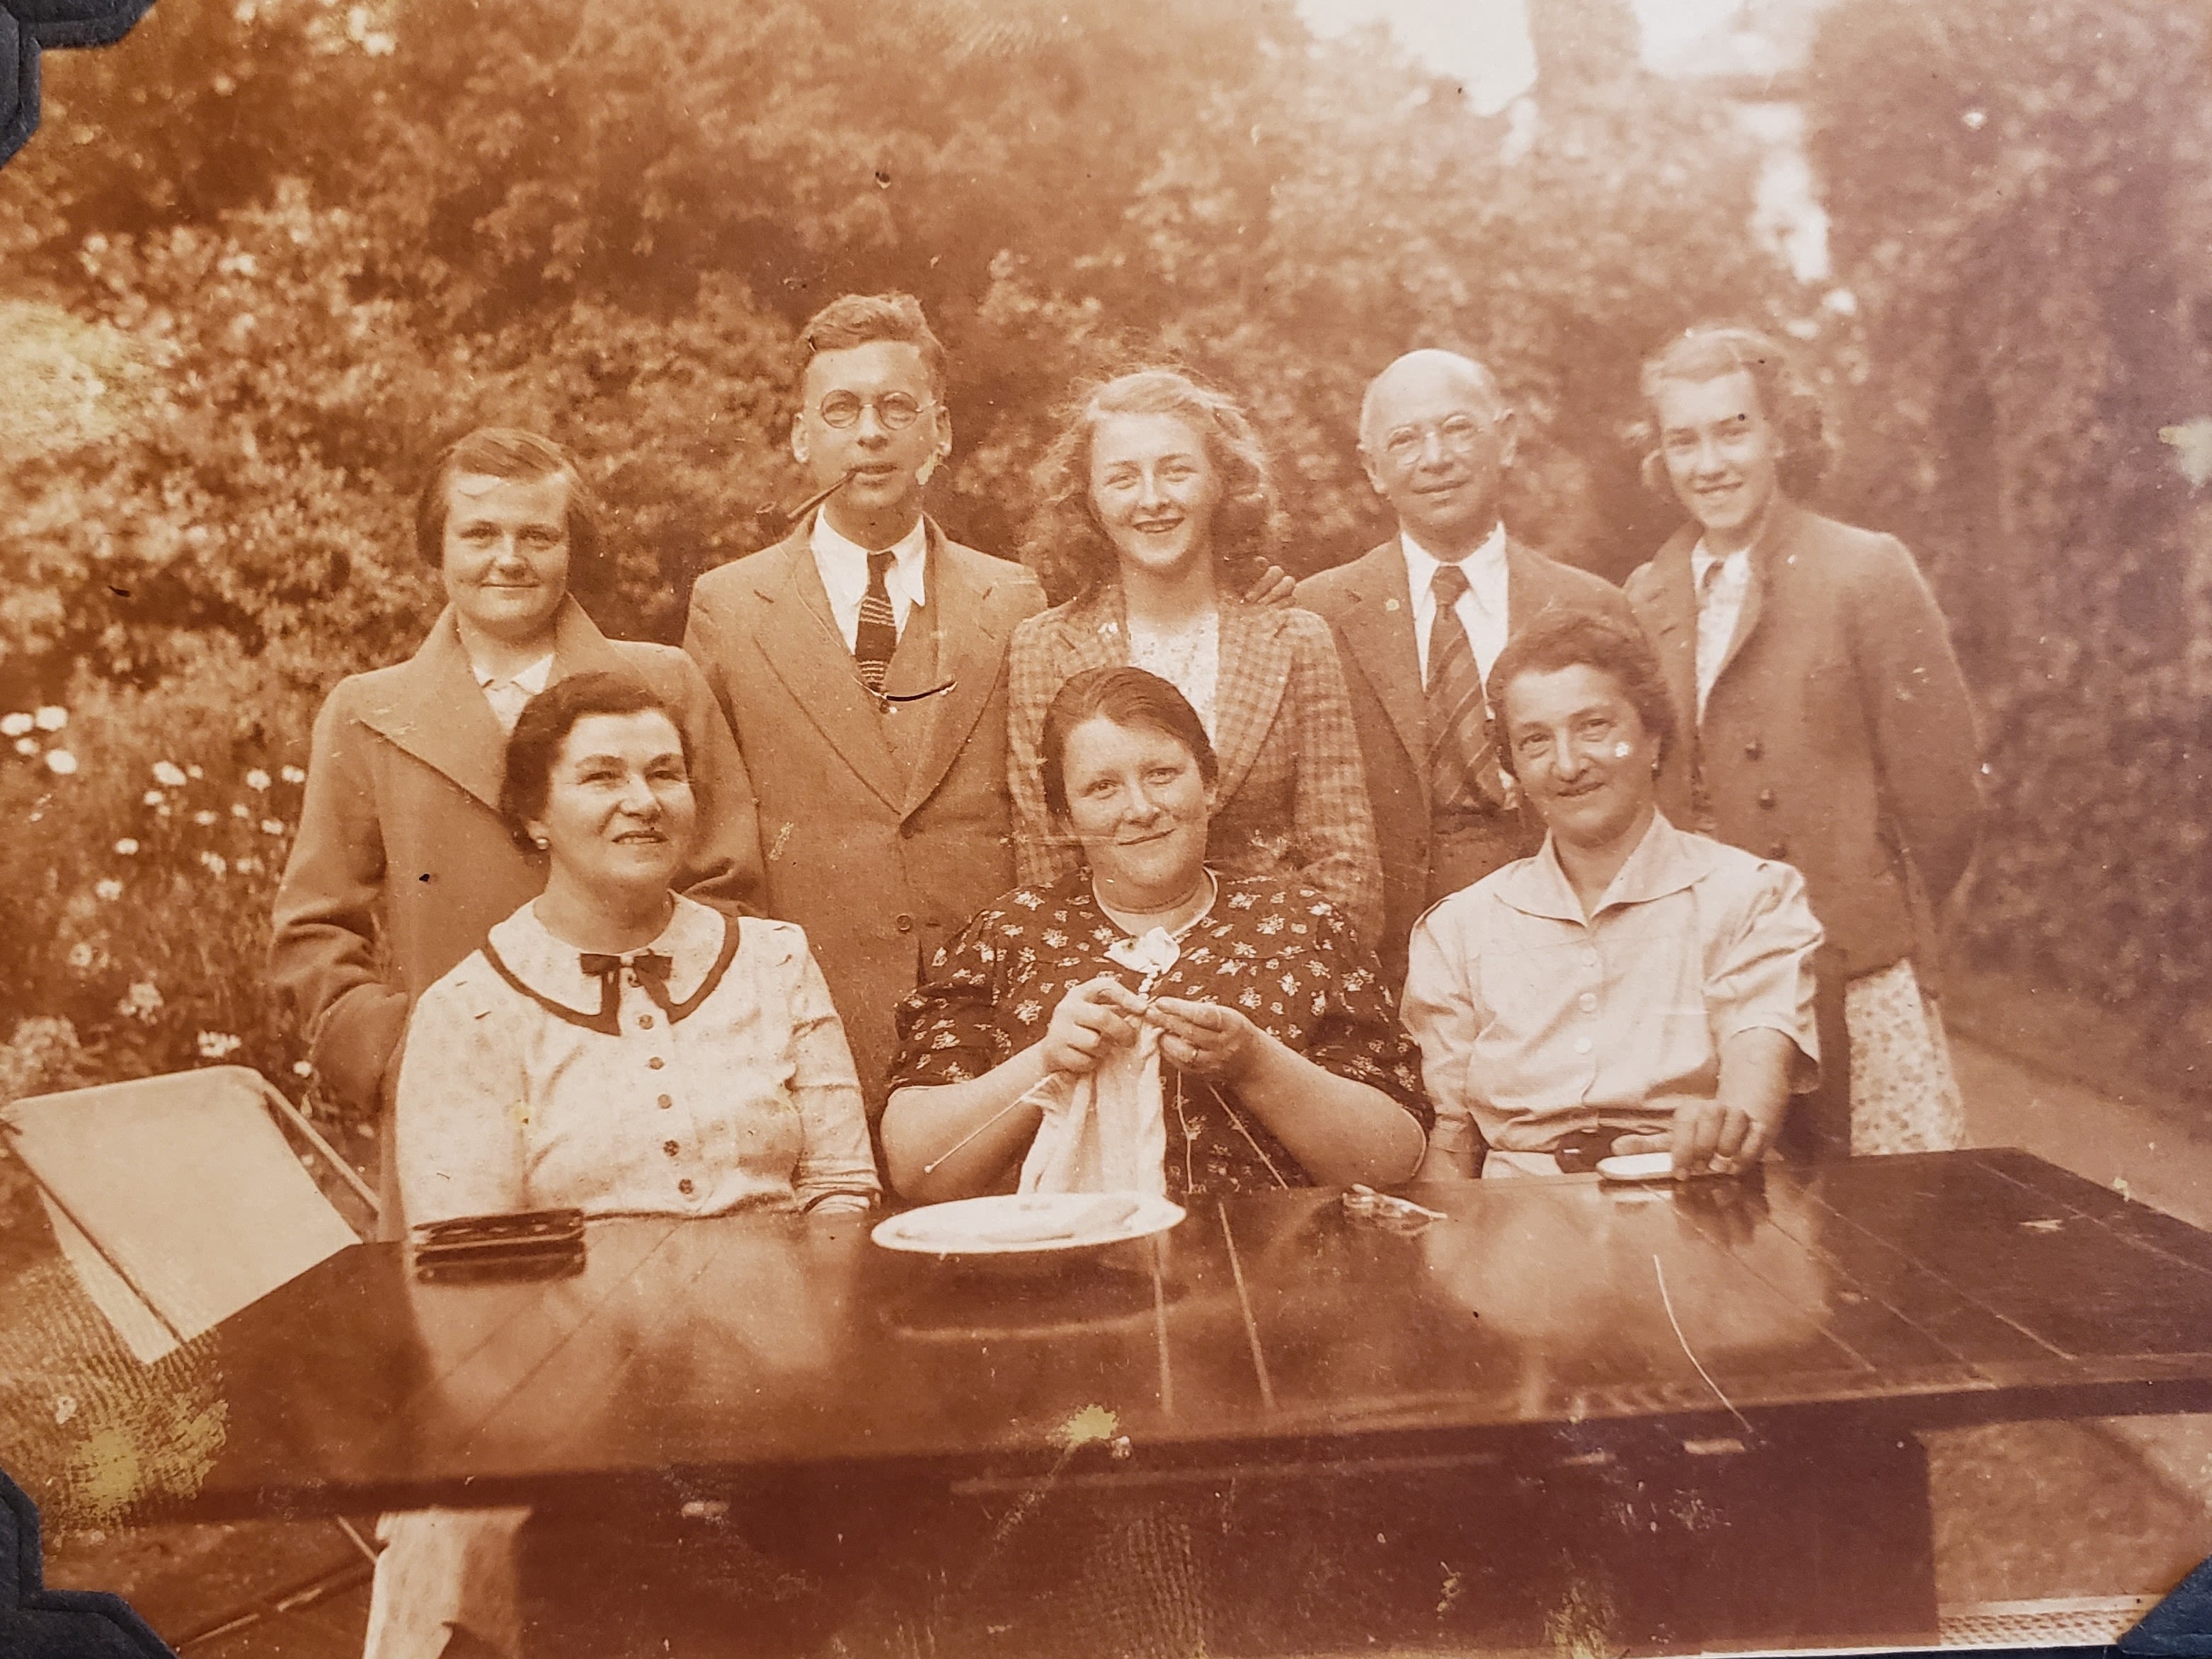 Sepia photograph of a group of 8 people smiling at the camera. 5 people stand behind 3 people seated at a table in a garden. There are 6 women and 2 men. One of the men has a pipe in his mouth, and one of the women is knitting. They are all dressed in 1940s clothing.